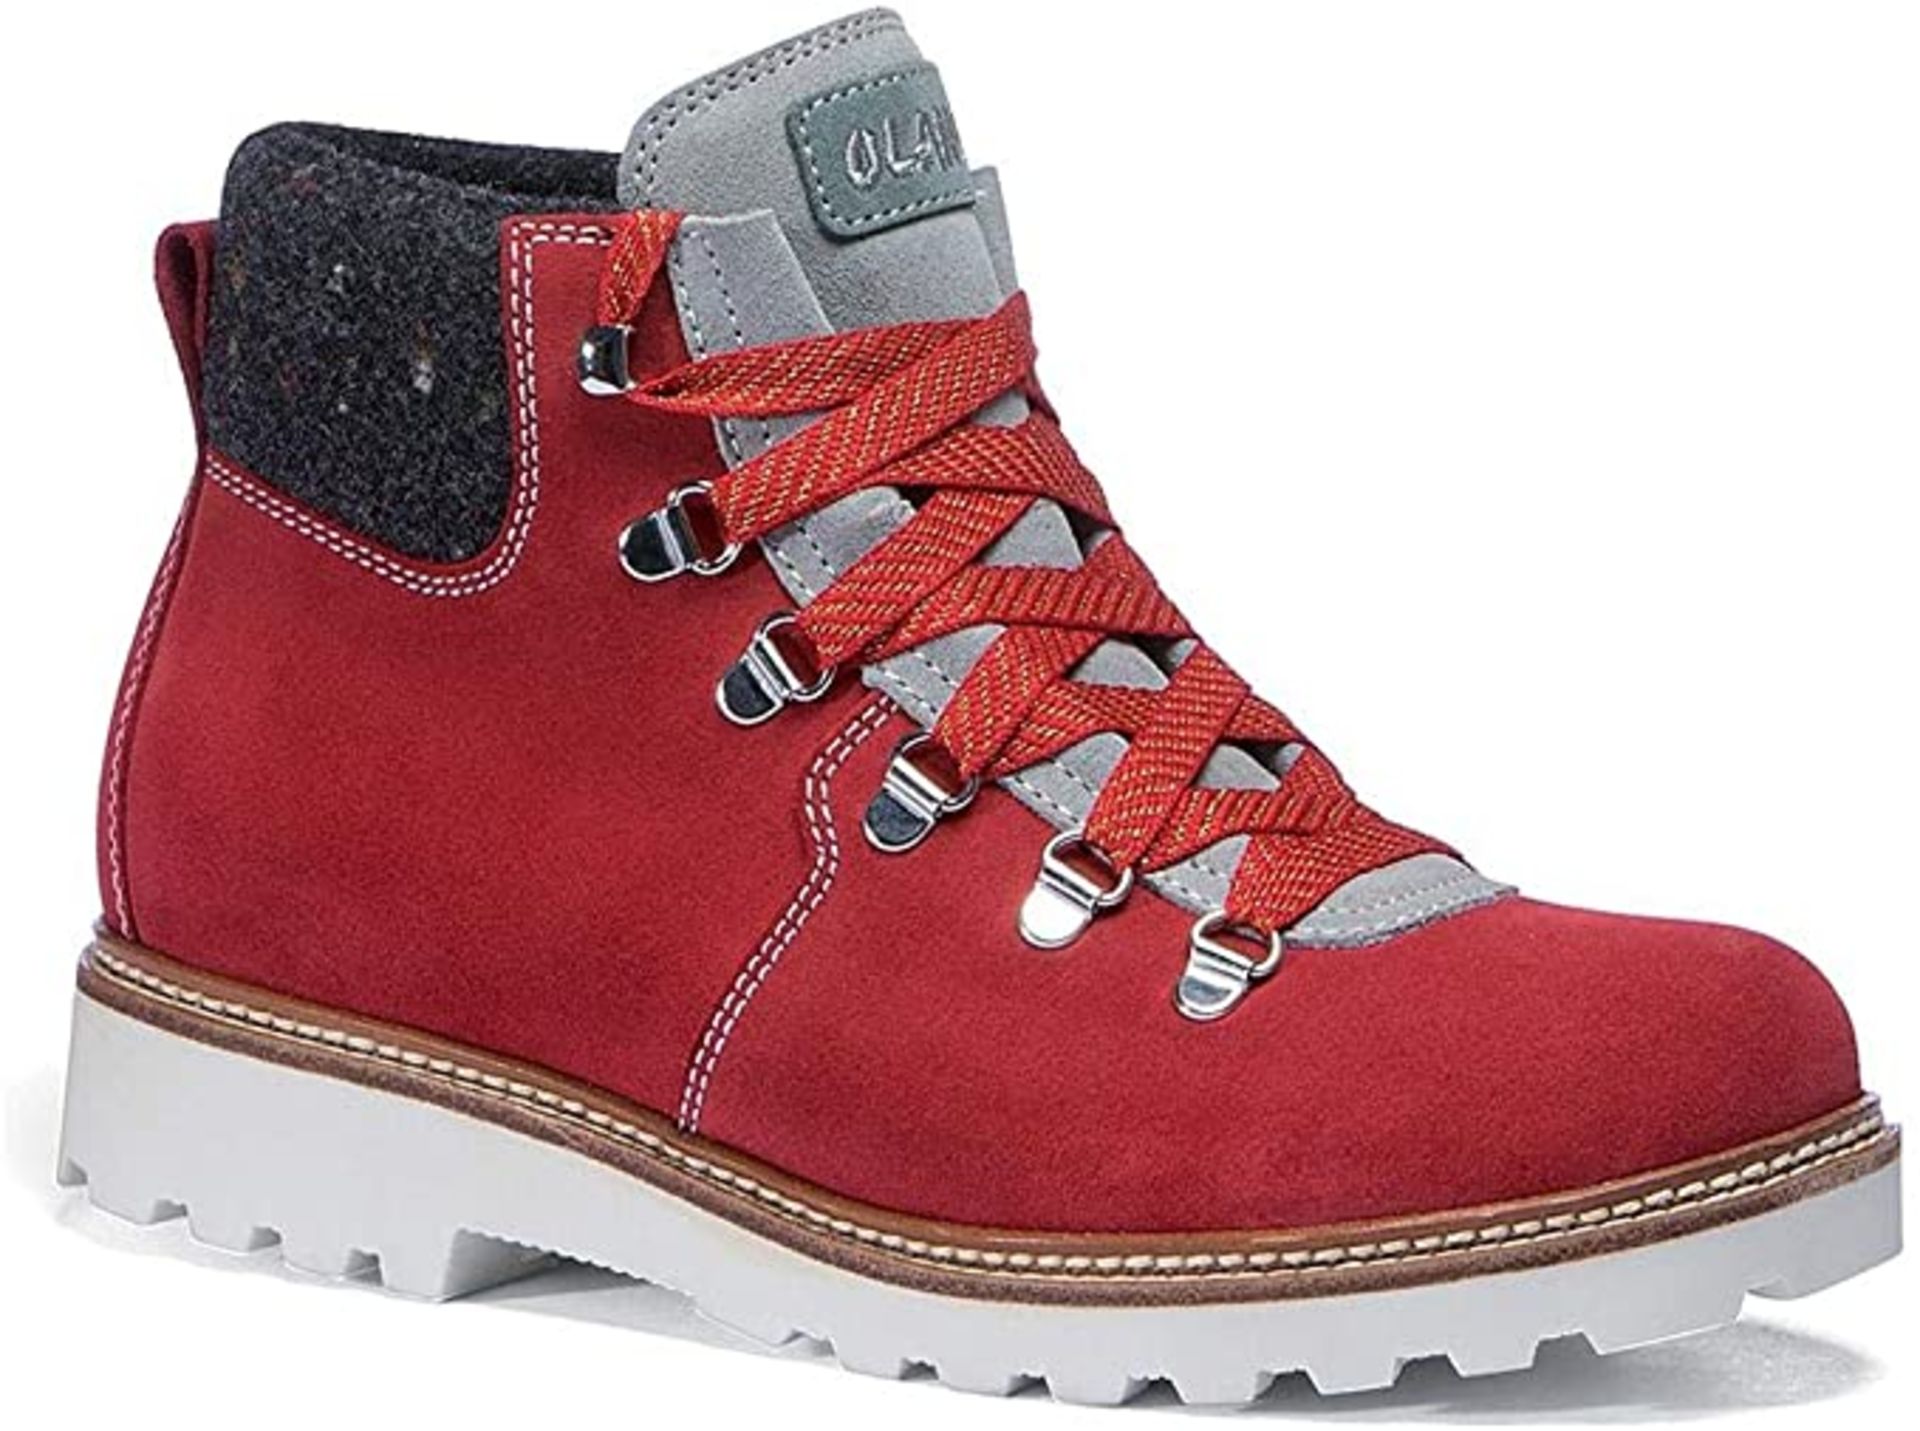 1 x Pair of Designer Olang Merano BTX 815 Rosso Women's Winter Boots - Euro Size 39 - Brand New - Image 4 of 4